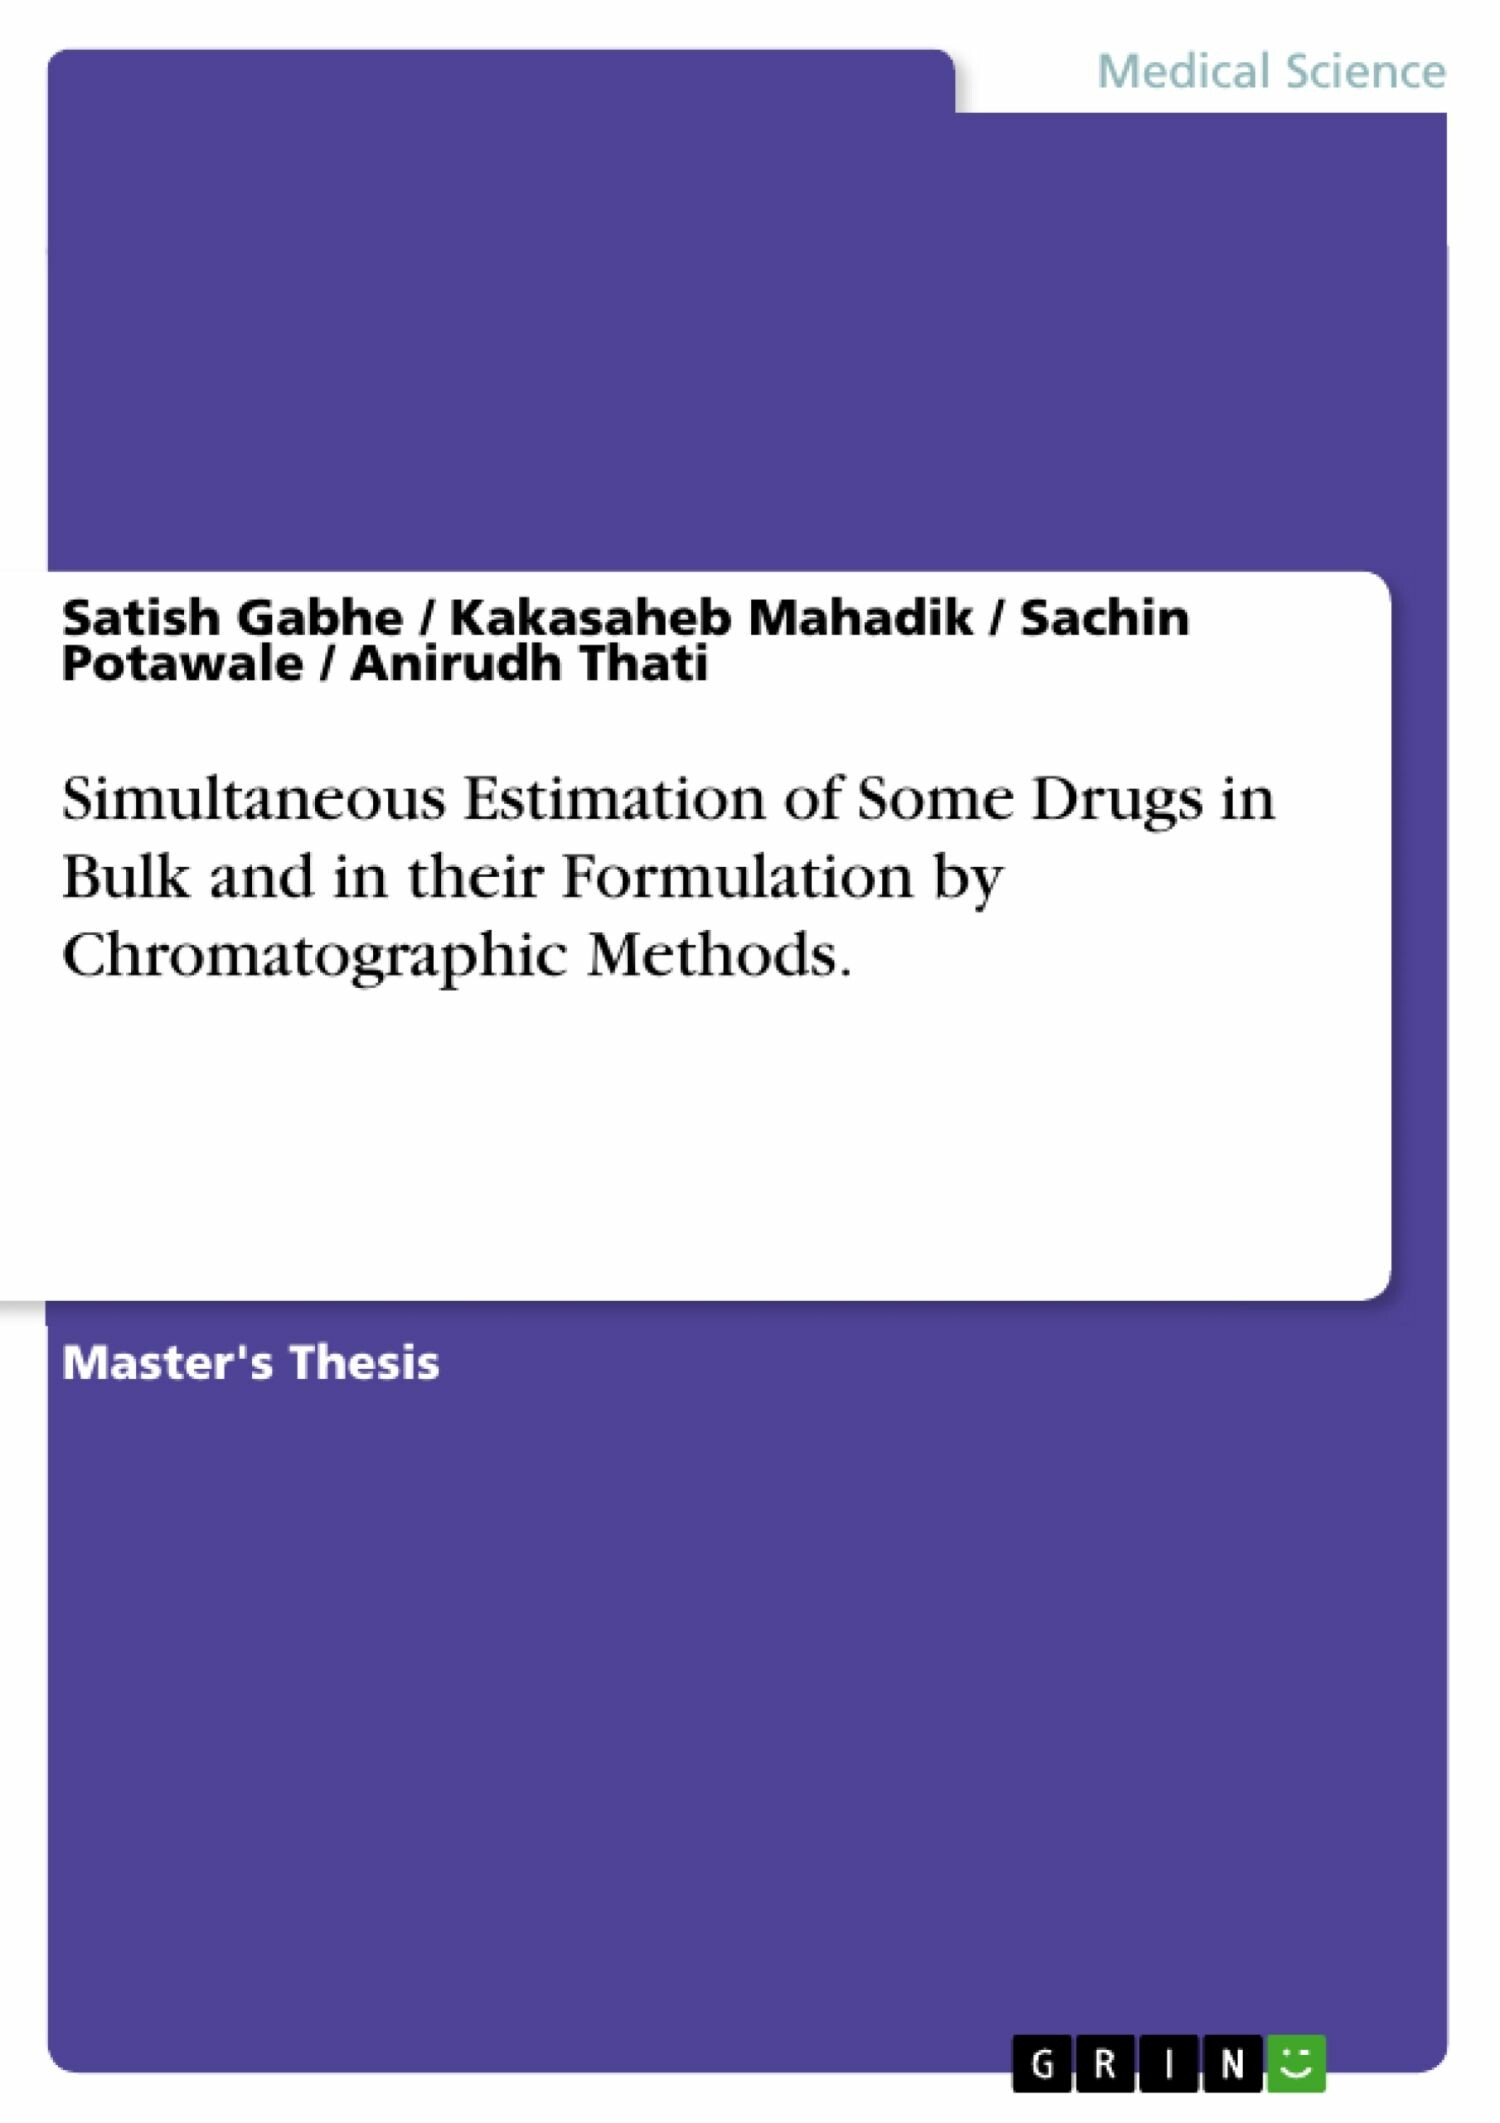 Simultaneous Estimation of Some Drugs in Bulk and in their Formulation by Chromatographic Methods.